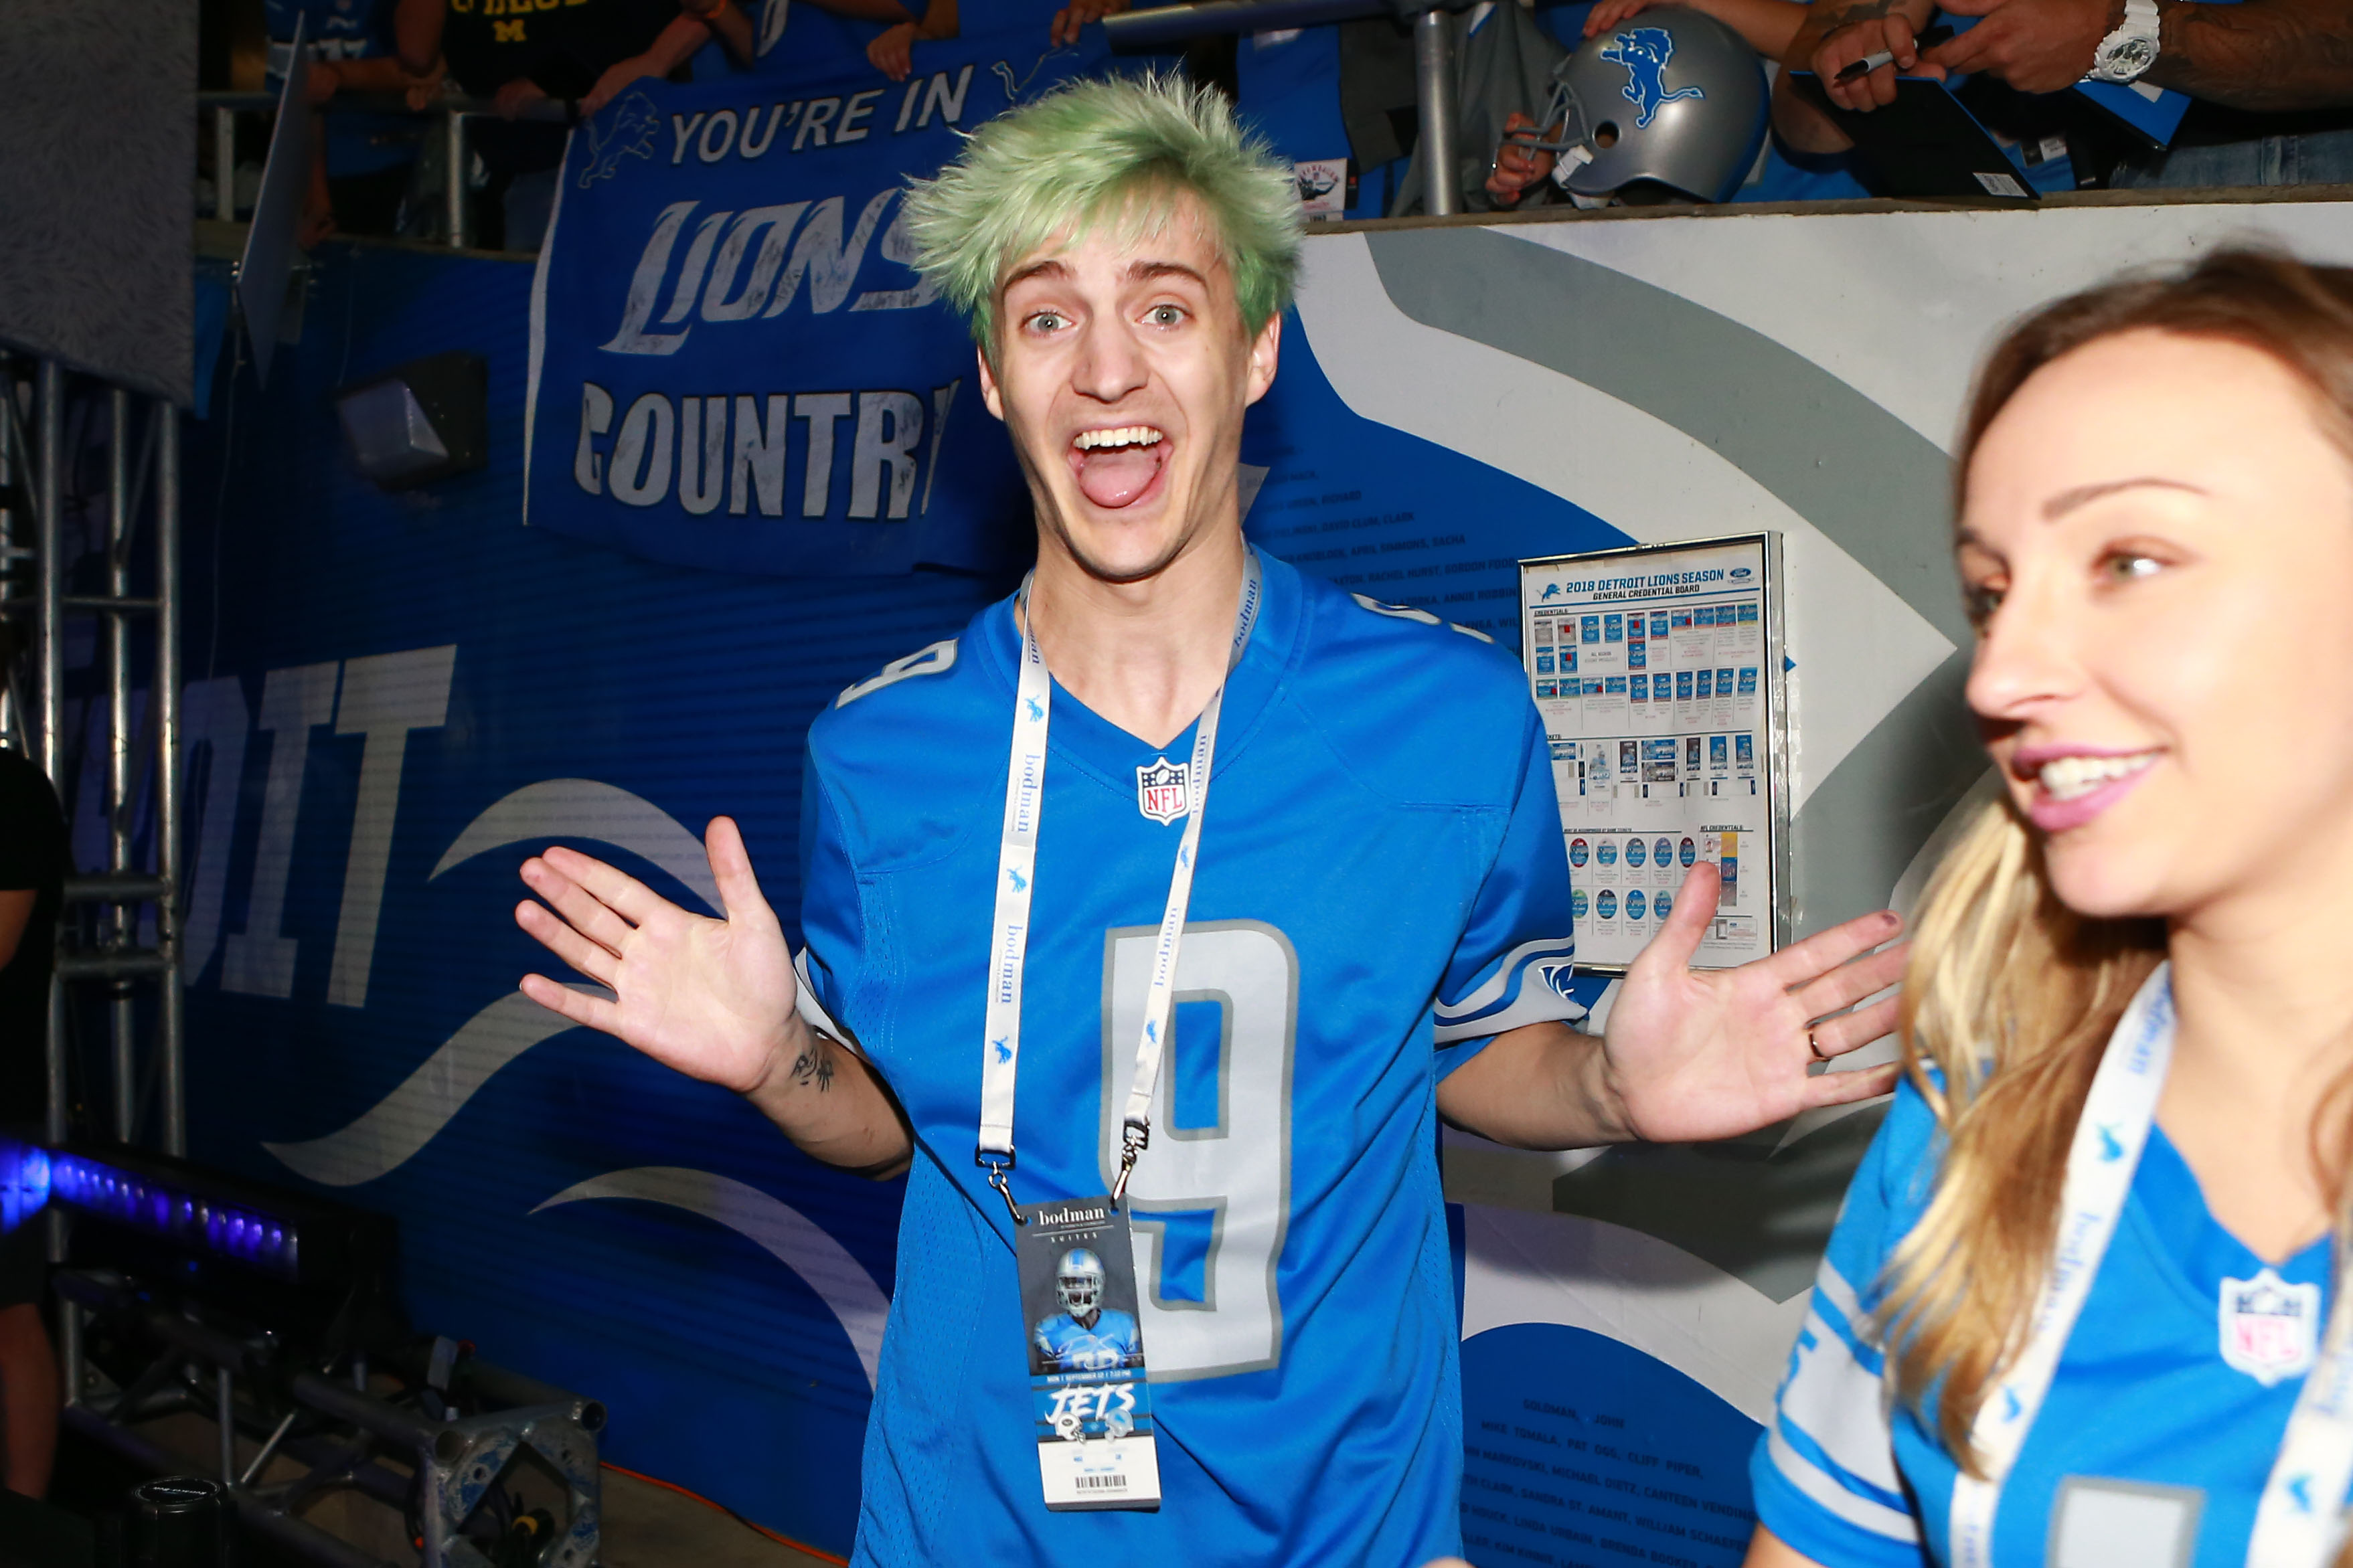 Ninja, Shroud & Other Twitch Streamers Gearing Up For “The Doritos Bowl”